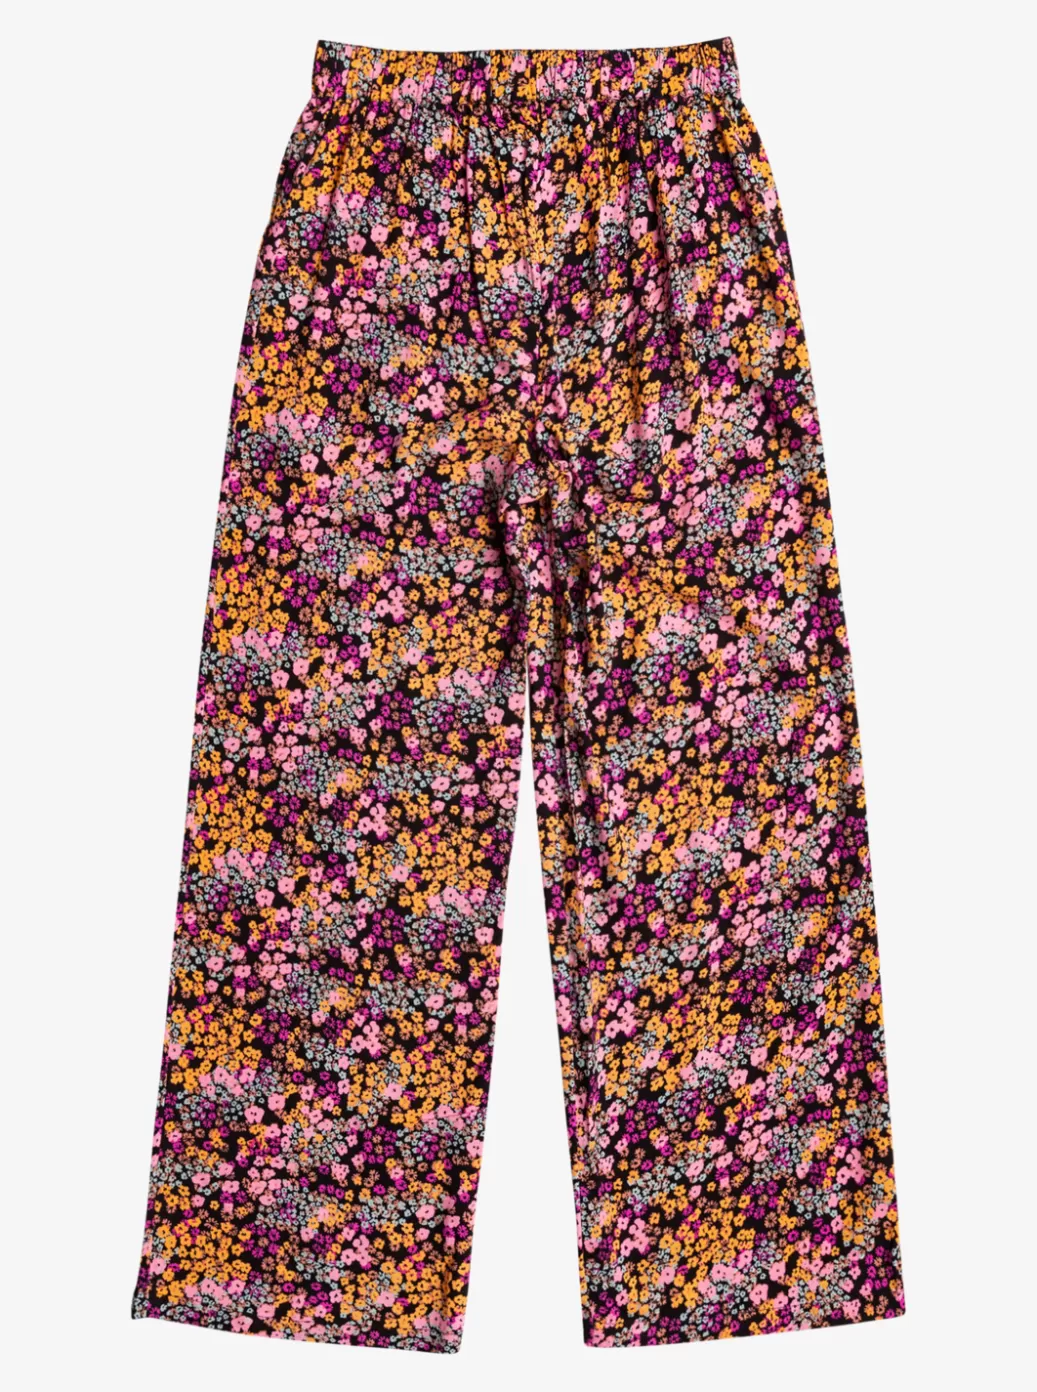 Jeans & Pants | KIDS ROXY Girl's 4-16 You Found Me Palazzo Pants Anthracite Floral Daze